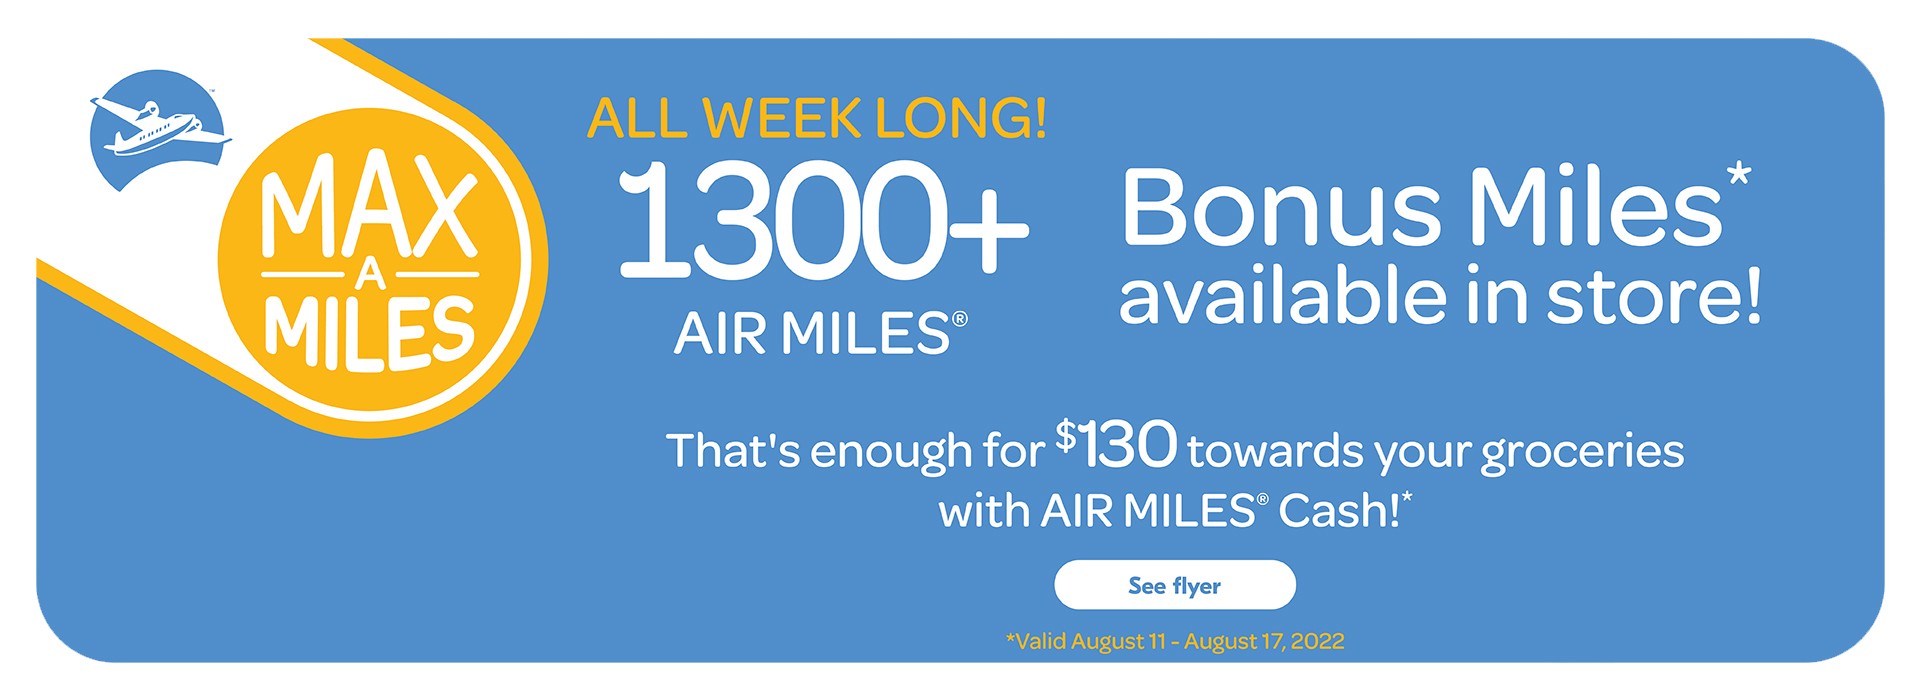 Text Reading 'Max A Miles. All week long! 1300+ Air Miles. Bonus Miles available in store! That's enough for $130 towards your groceries with Air Miles Cash! Valid from August 11, 2022 to August 17, 2022. 'See flyer' button here.'